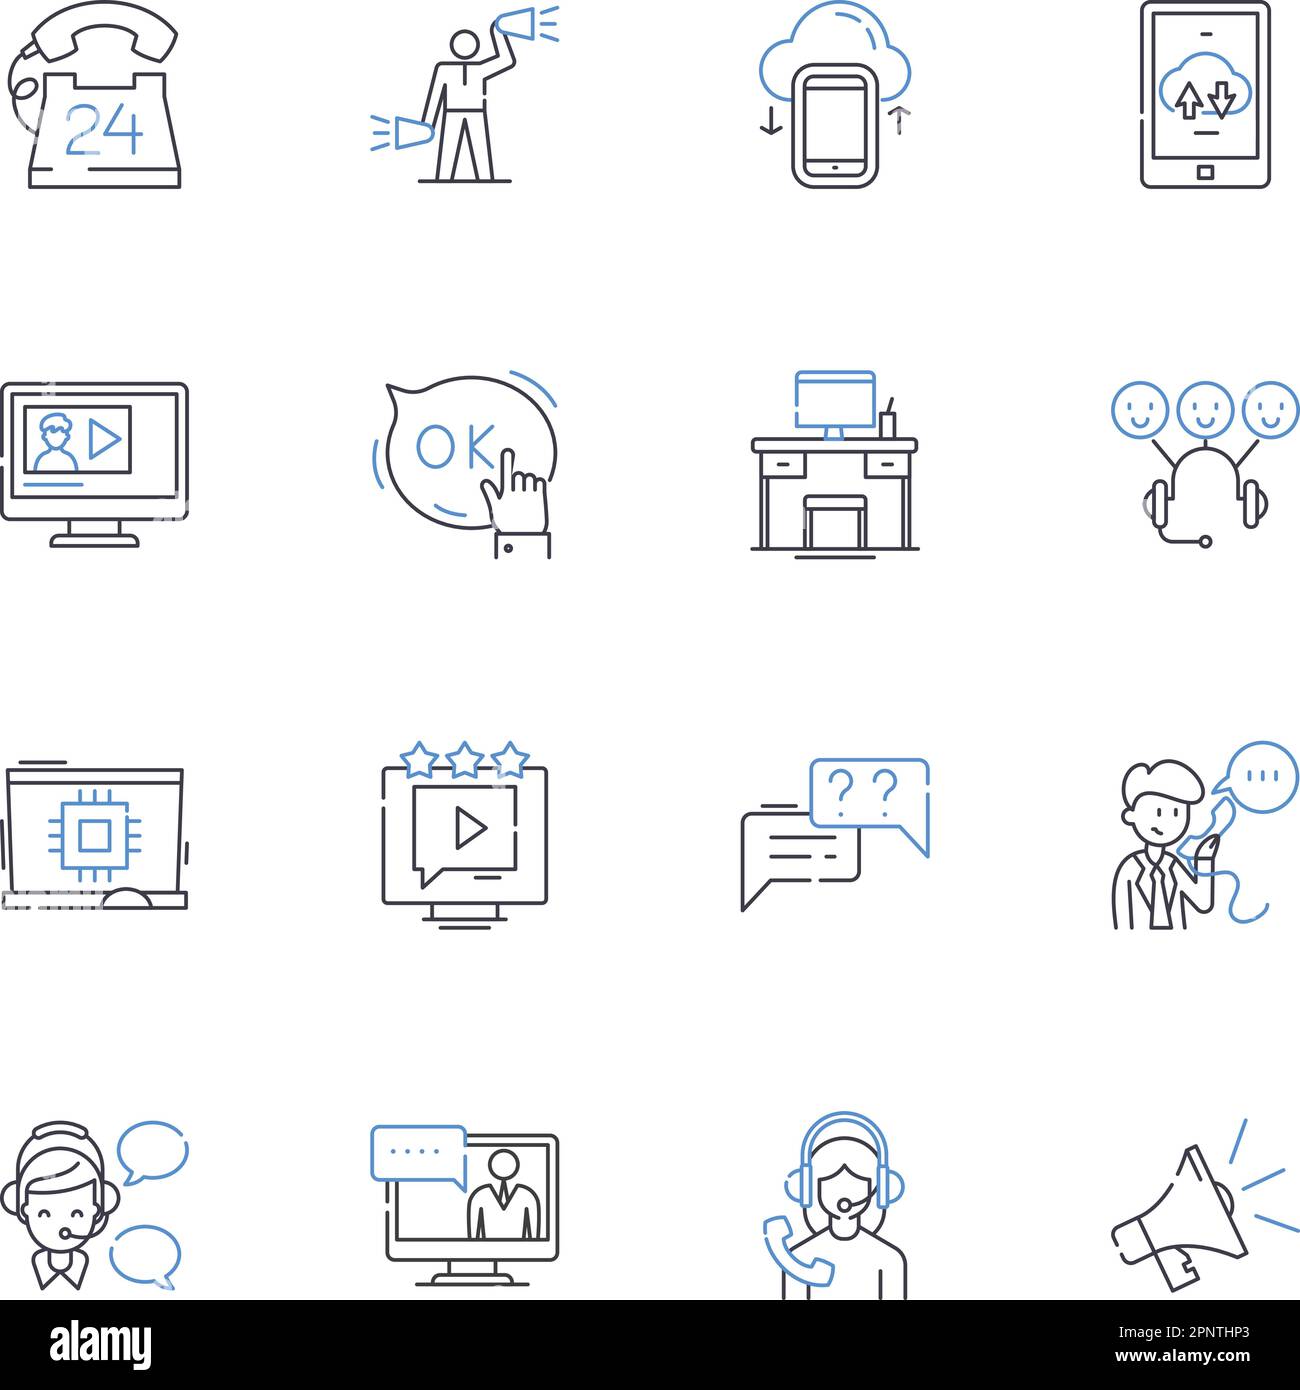 Ebook reader line icons collection. E-ink, Digital, Lightweight, Portable, Convenience, Battery, Touchscreen vector and linear illustration. Display Stock Vector